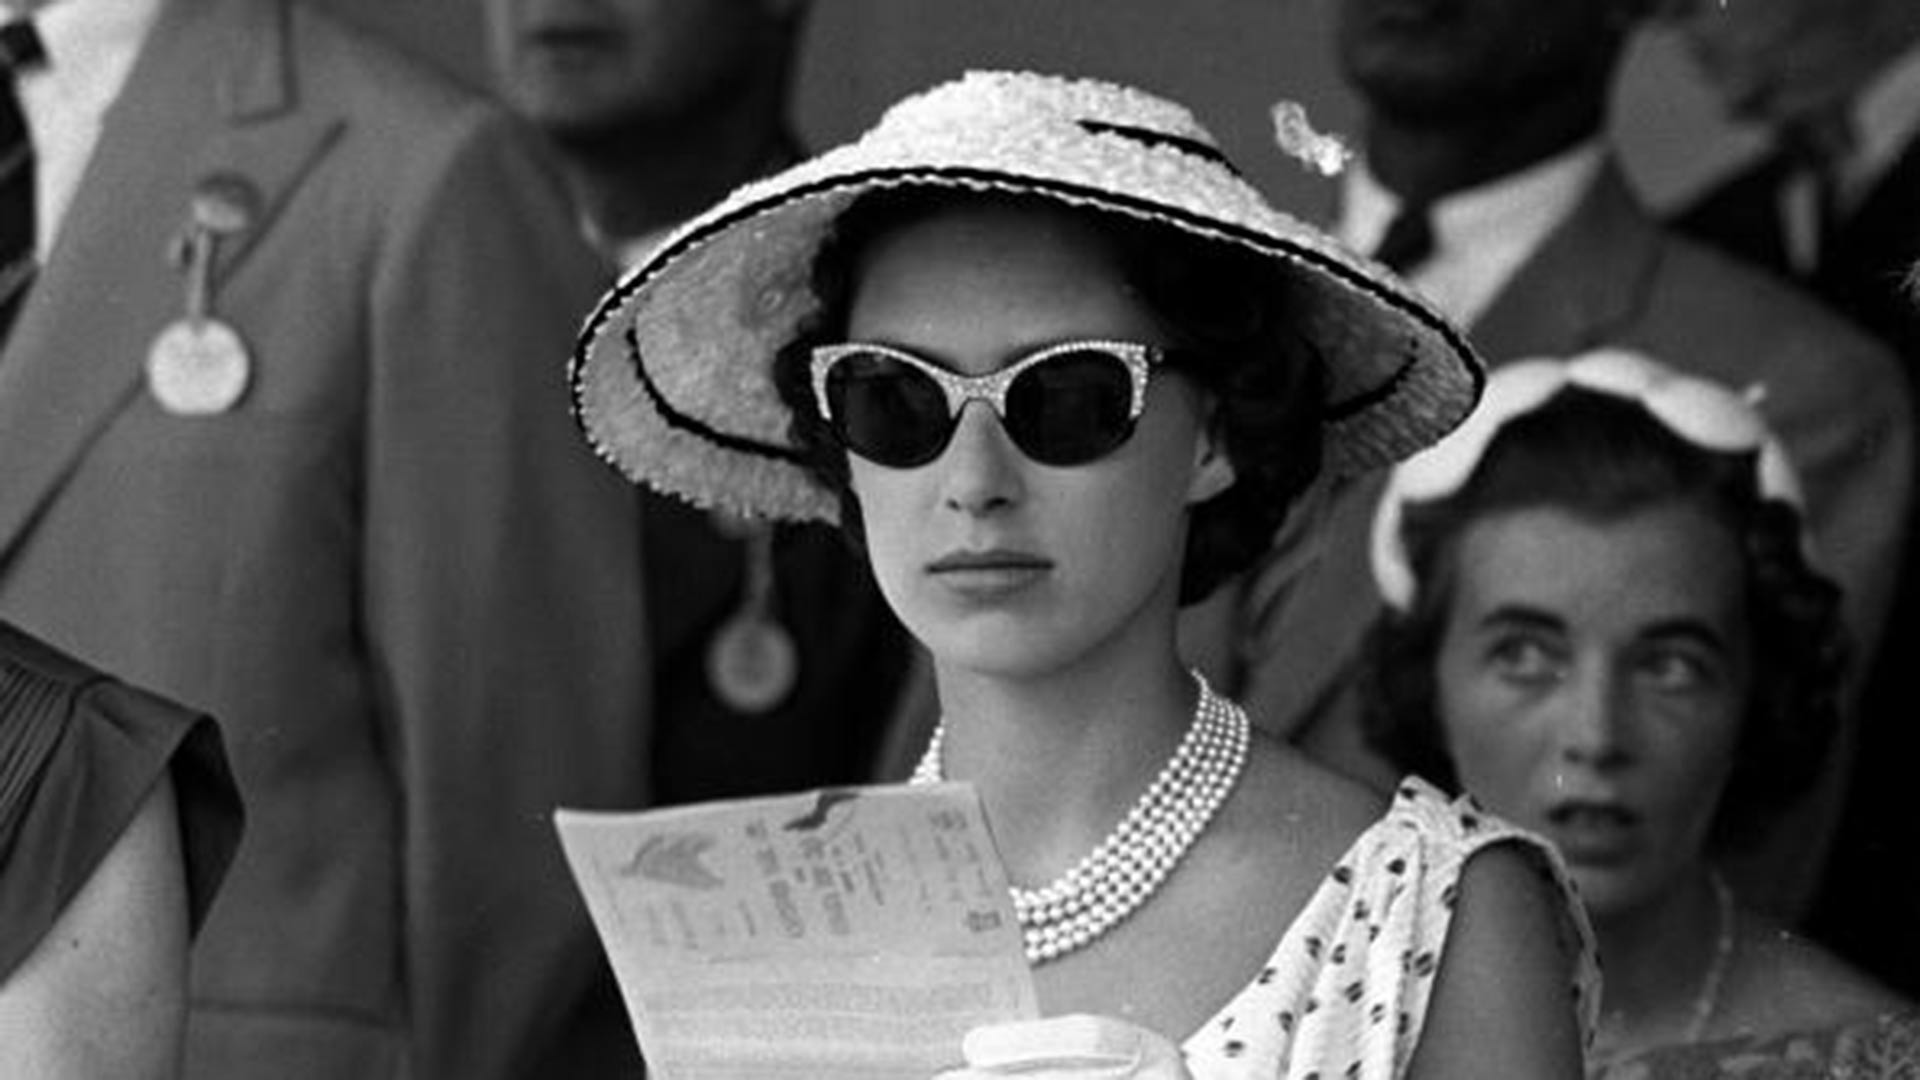 Princess Margaret pictured at the races at Kingston during the Royal Tour of the Caribbean.